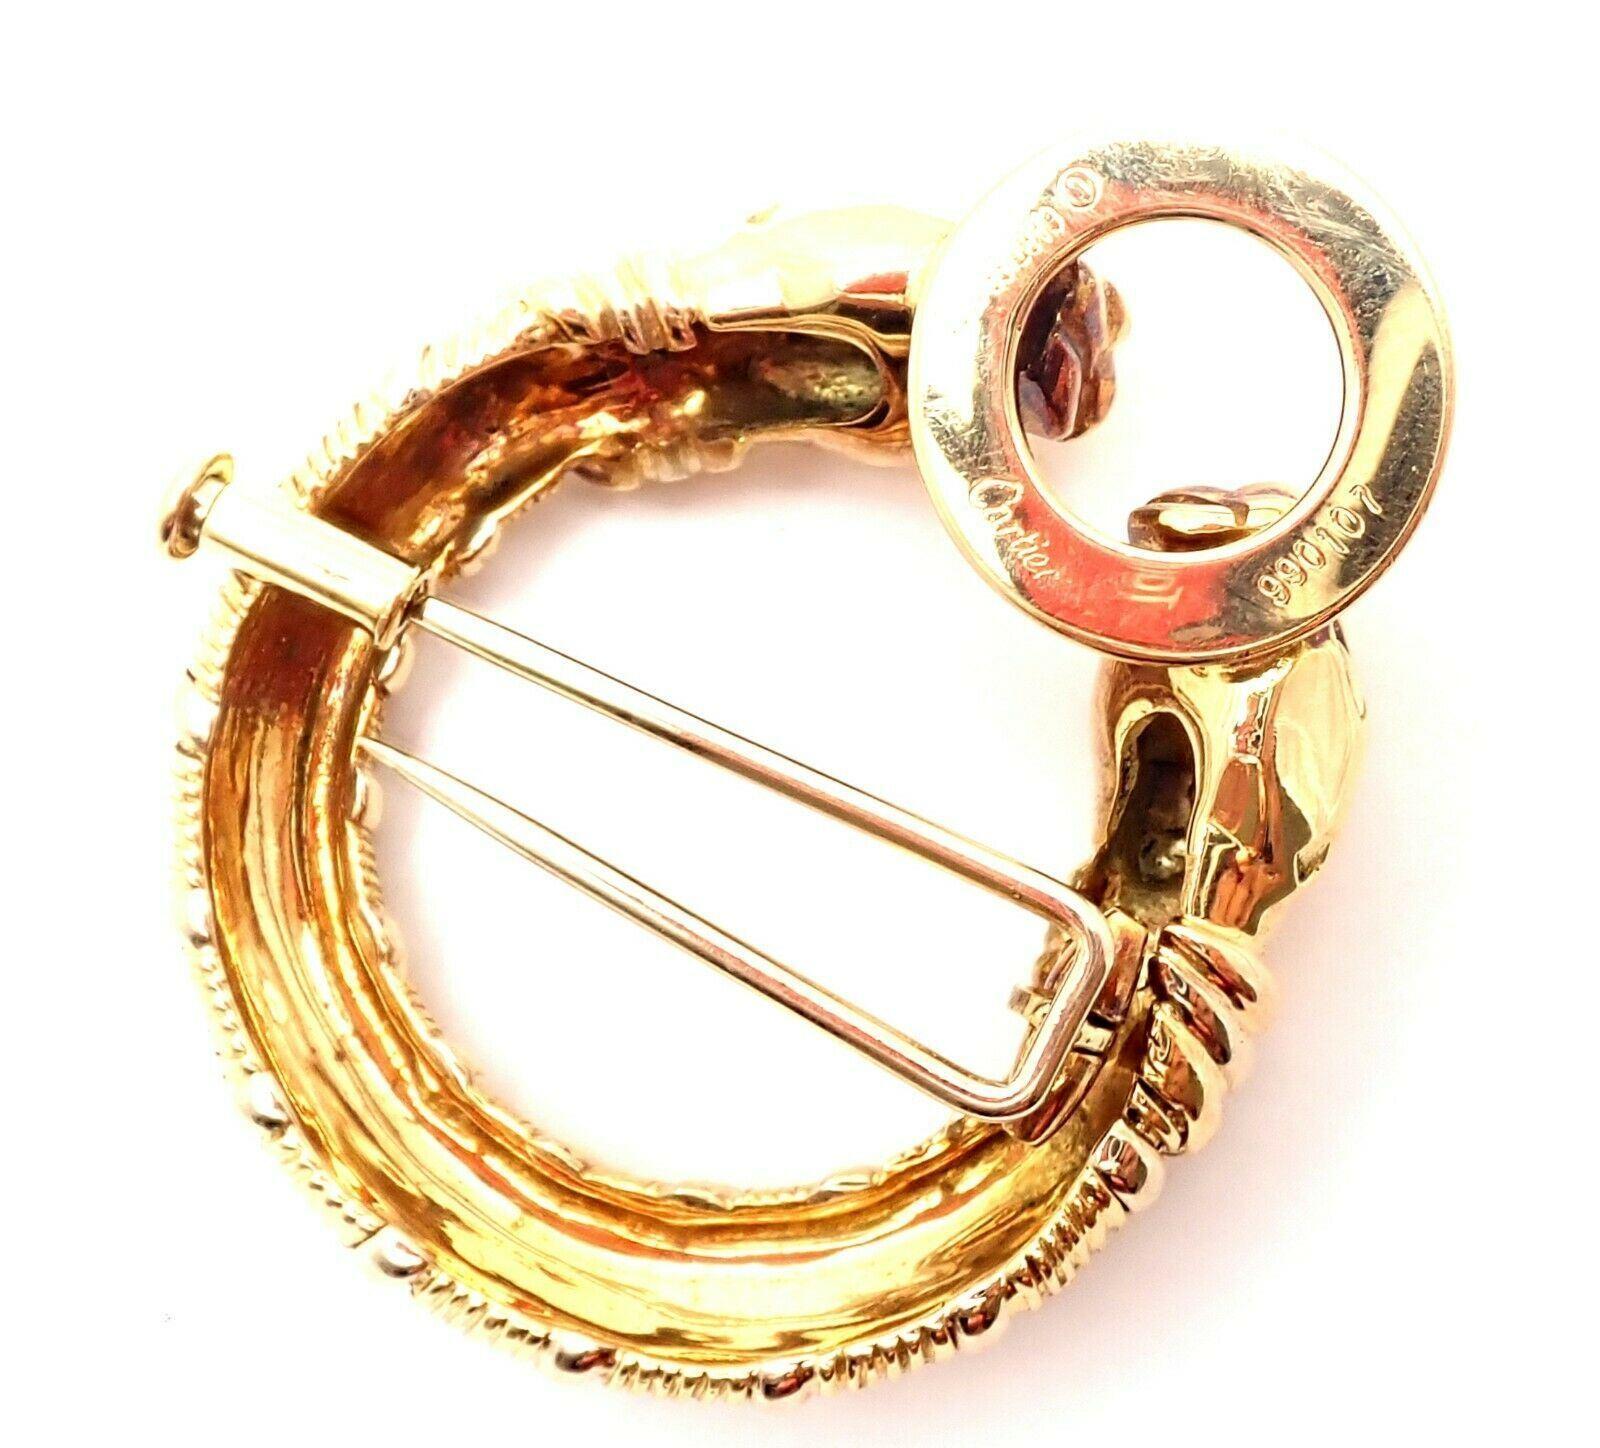 Cartier Panther Panthere Tri-Colored Gold Pin Brooch For Sale 1